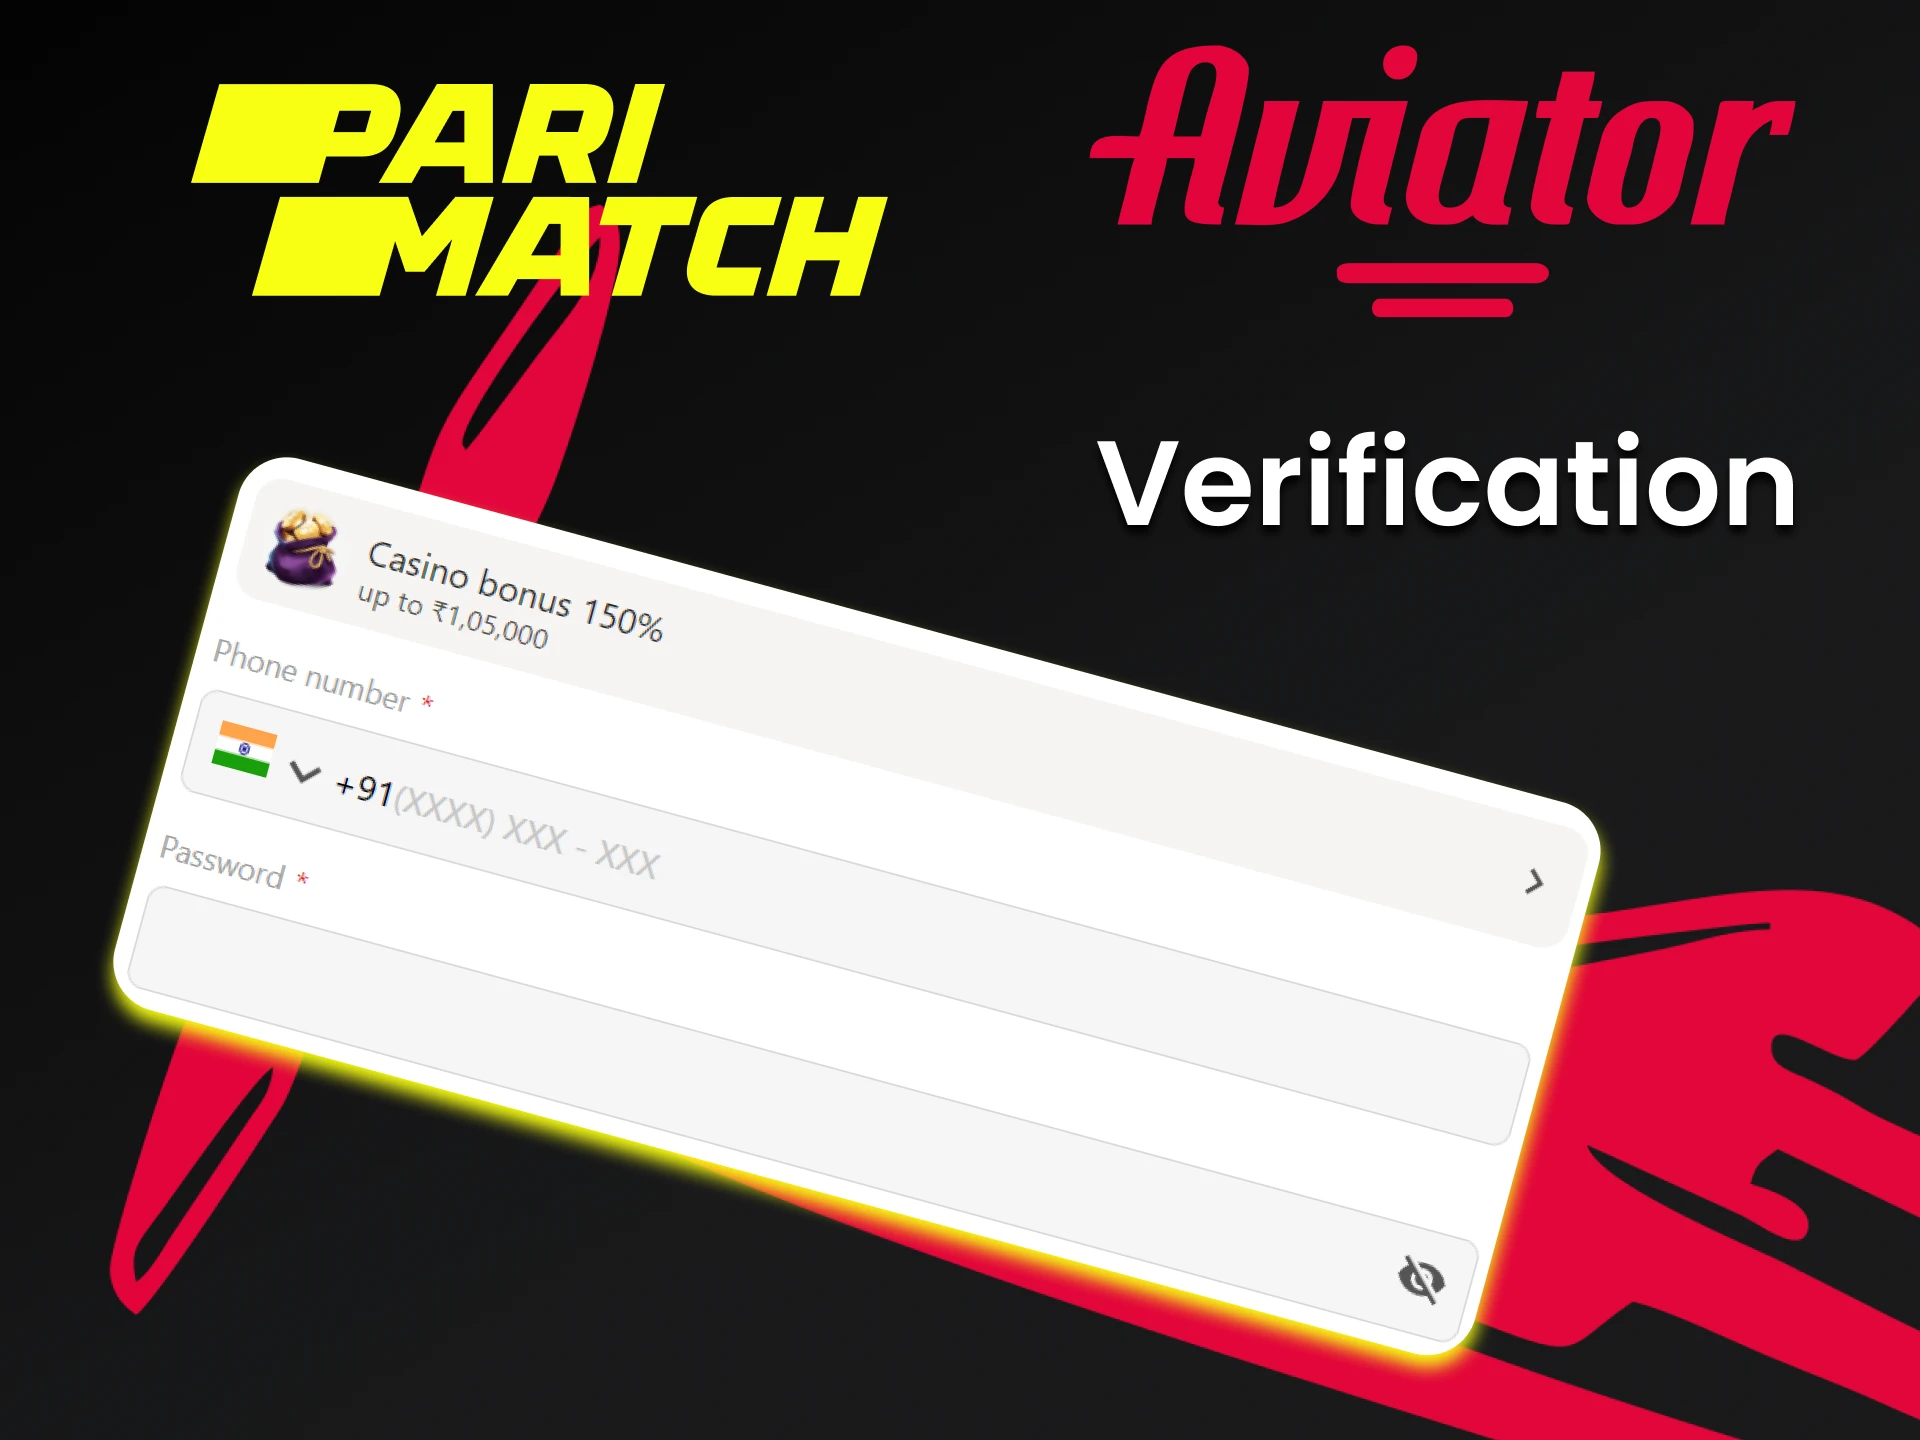 Enter certain data to play Aviator at Parimatch.